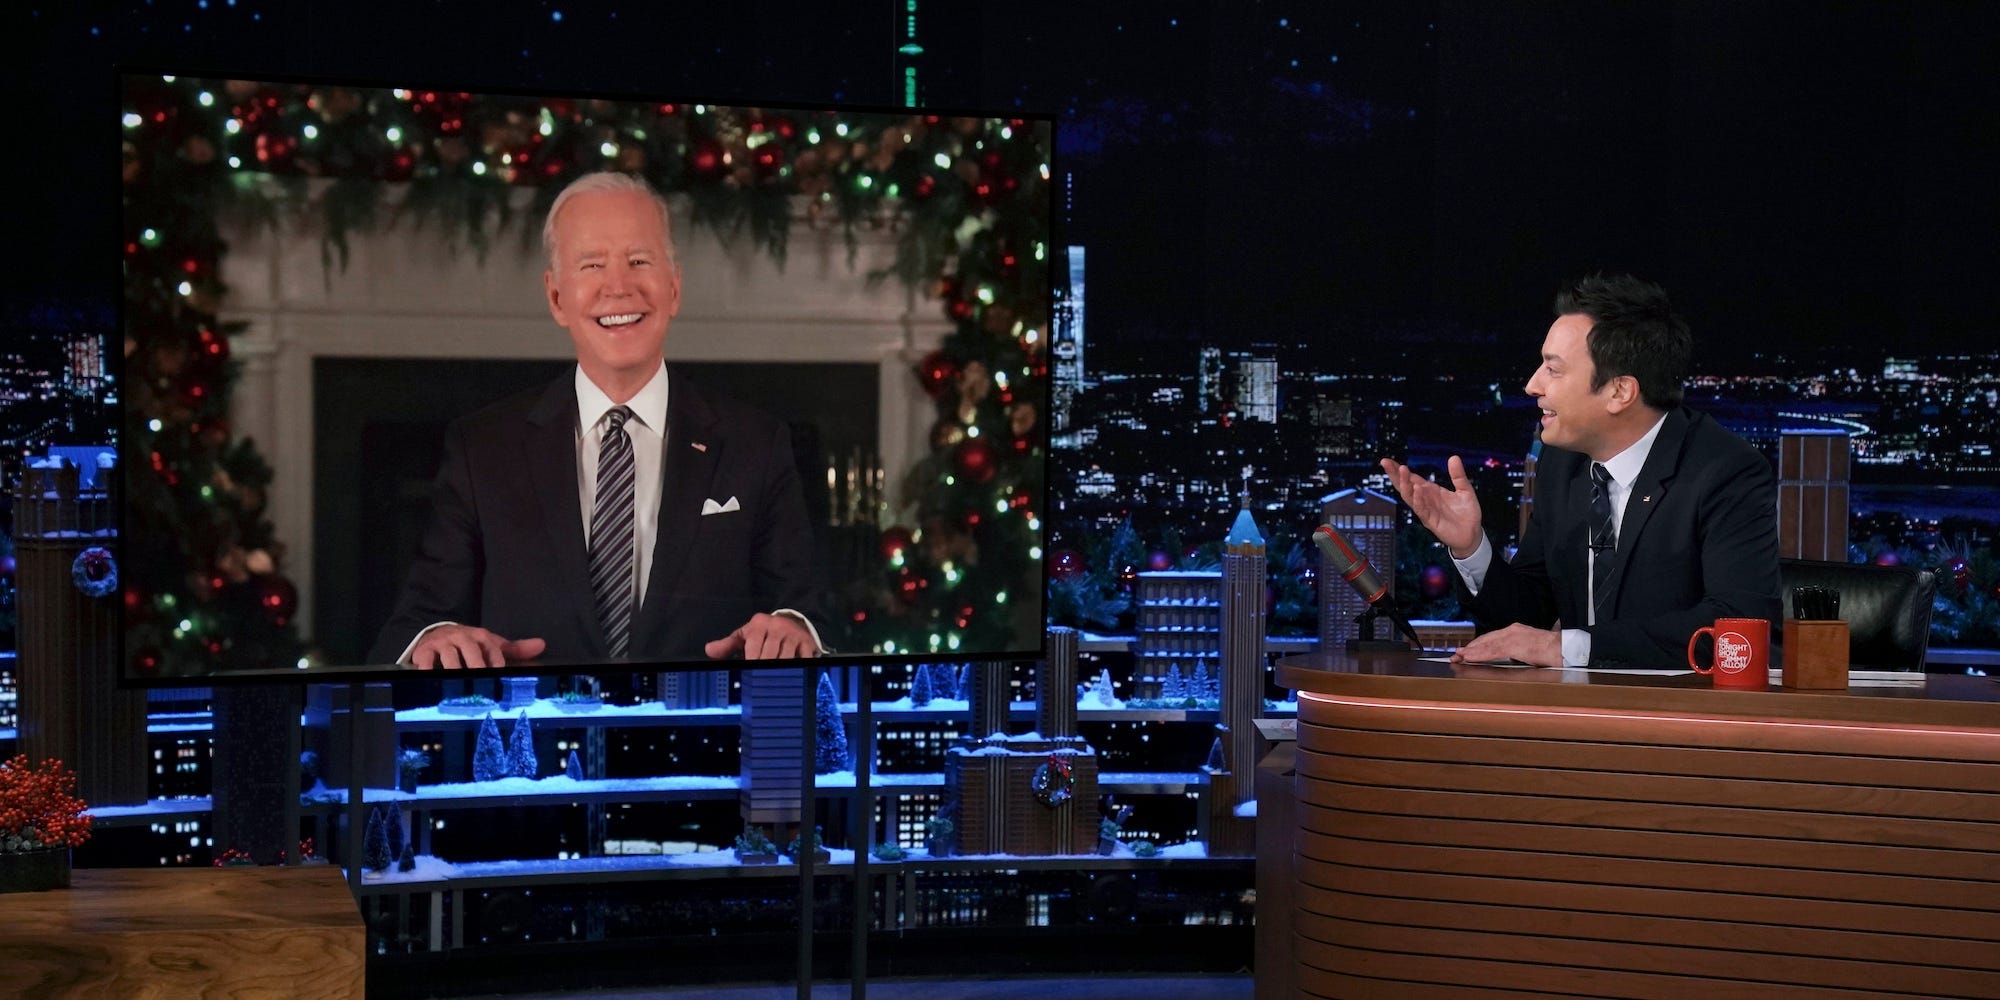 Pictured: (l-r) President Joe Biden during an interview with host Jimmy Fallon on Friday, December 10, 2021